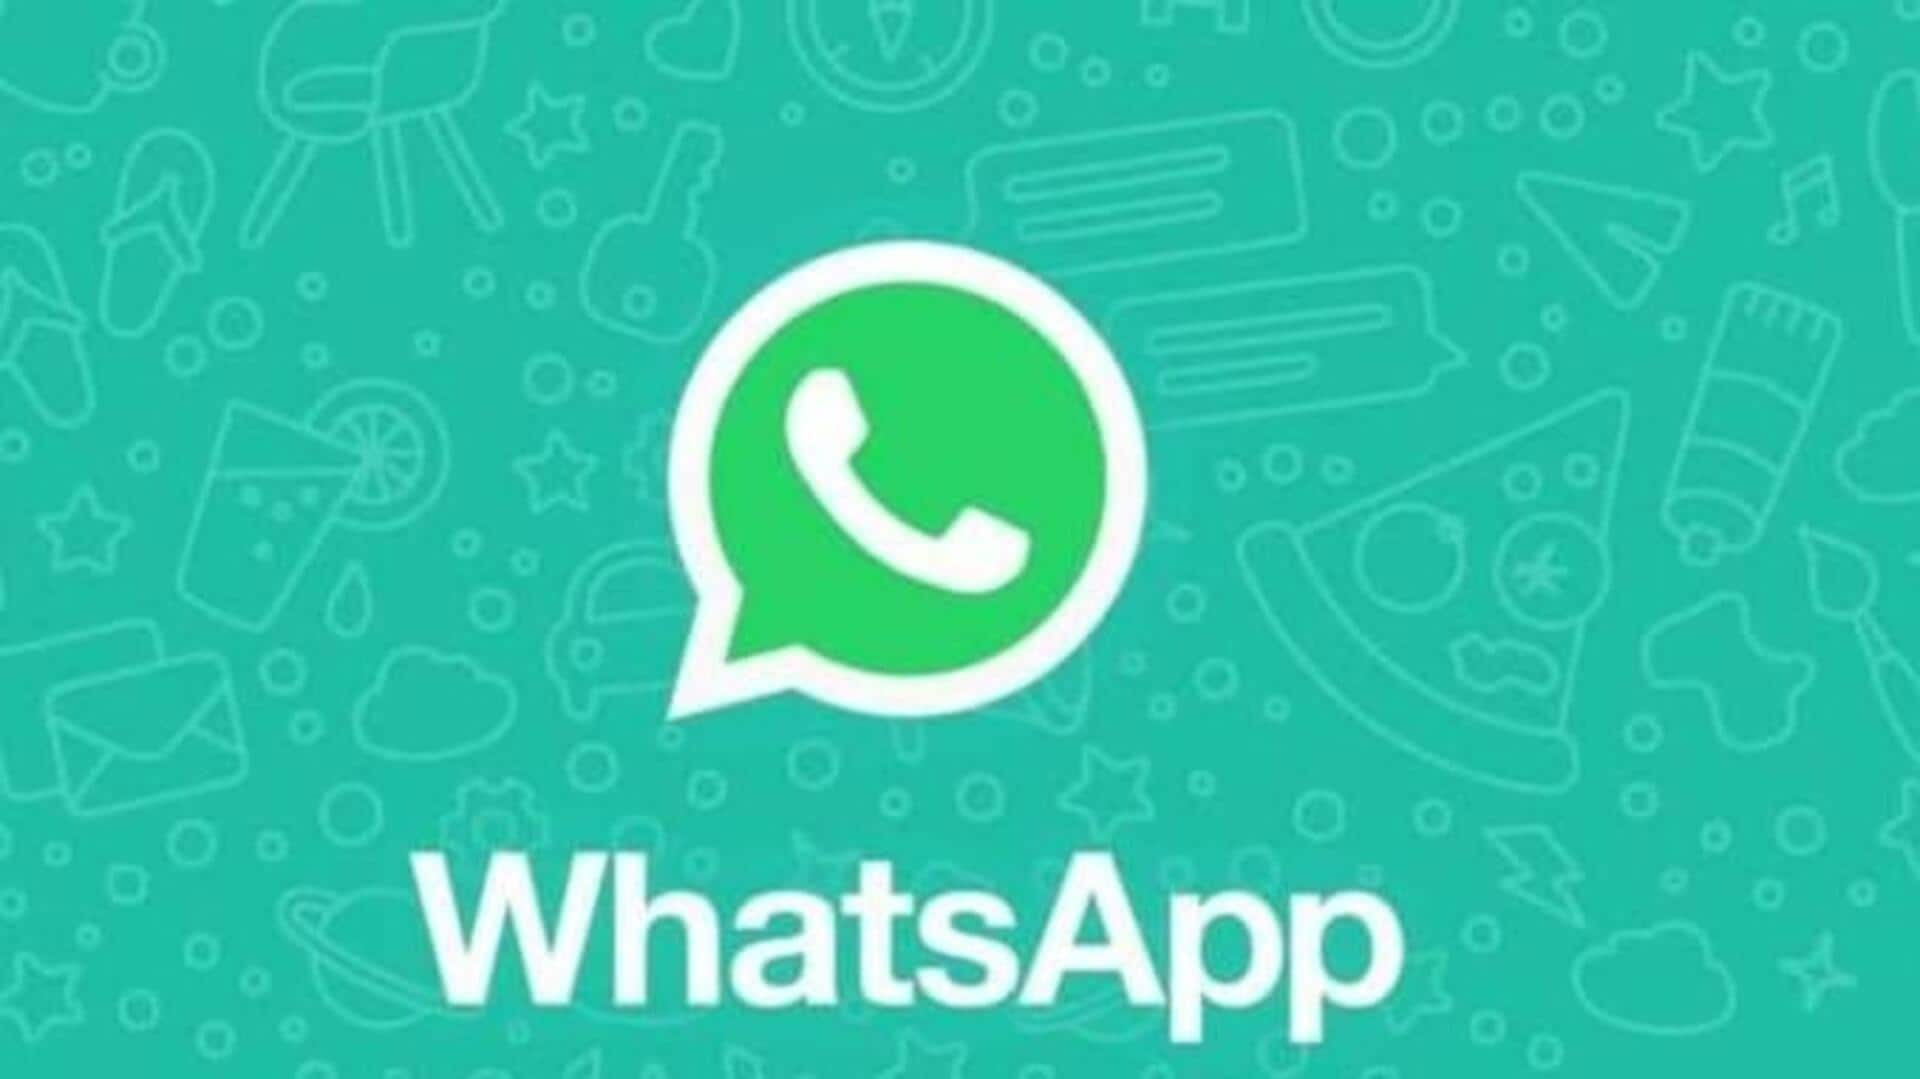 WhatsApp's new feature will automatically free up your device's storage